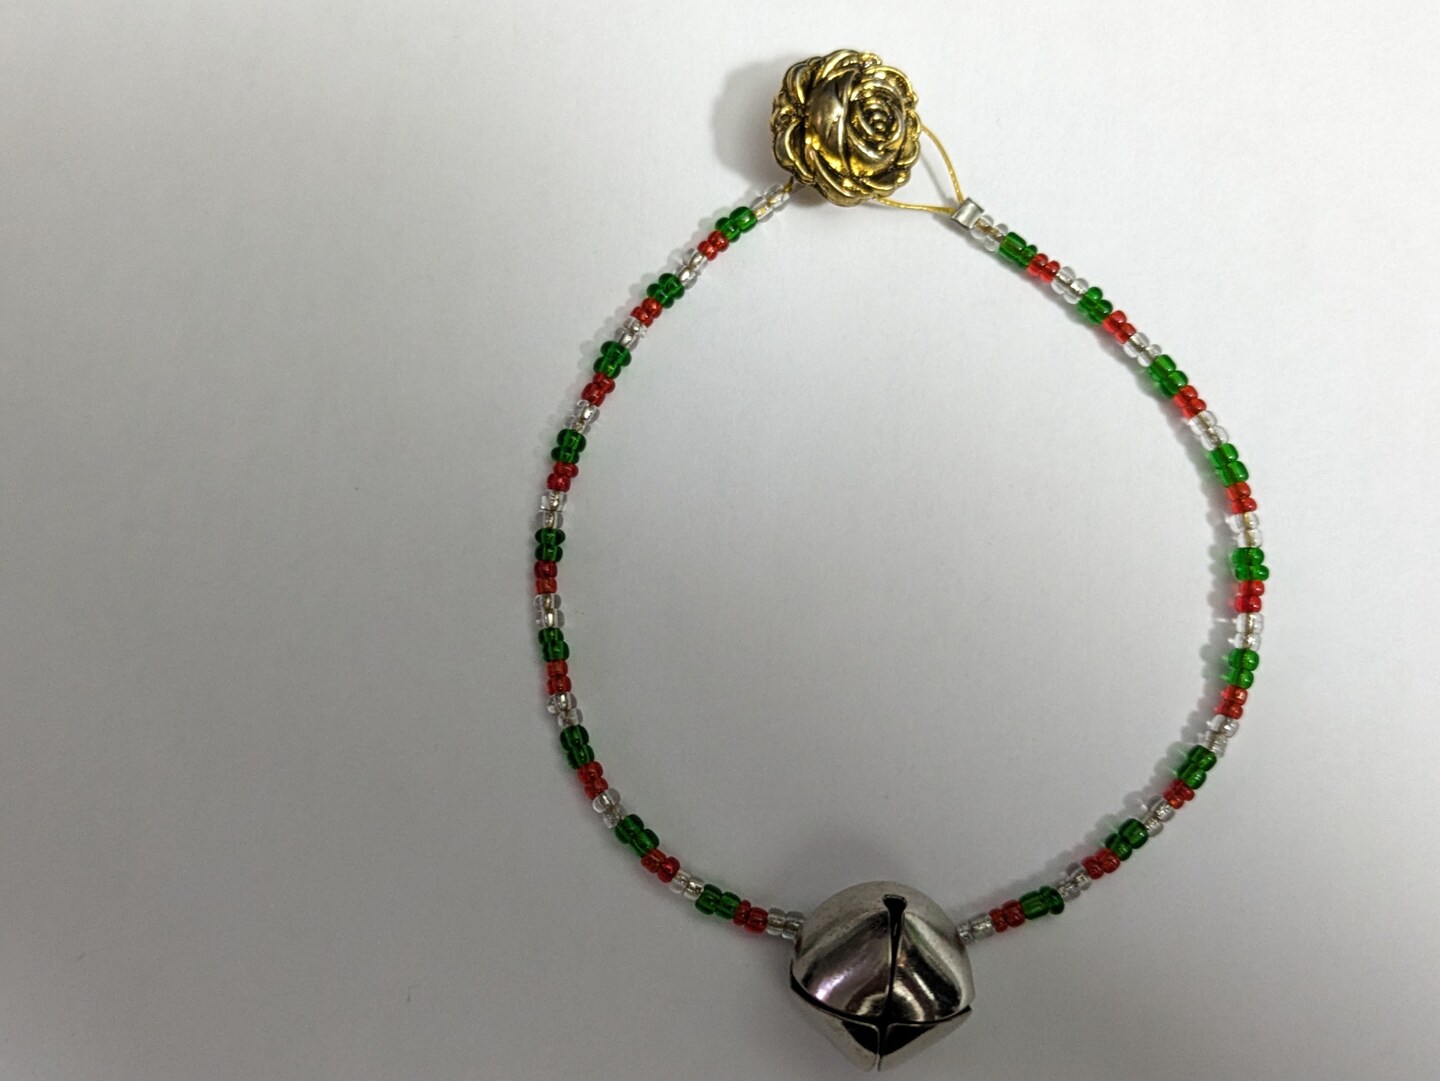 Jingle Bell Bracelet with red, green and silver seed beads. Gold flower  button clasp